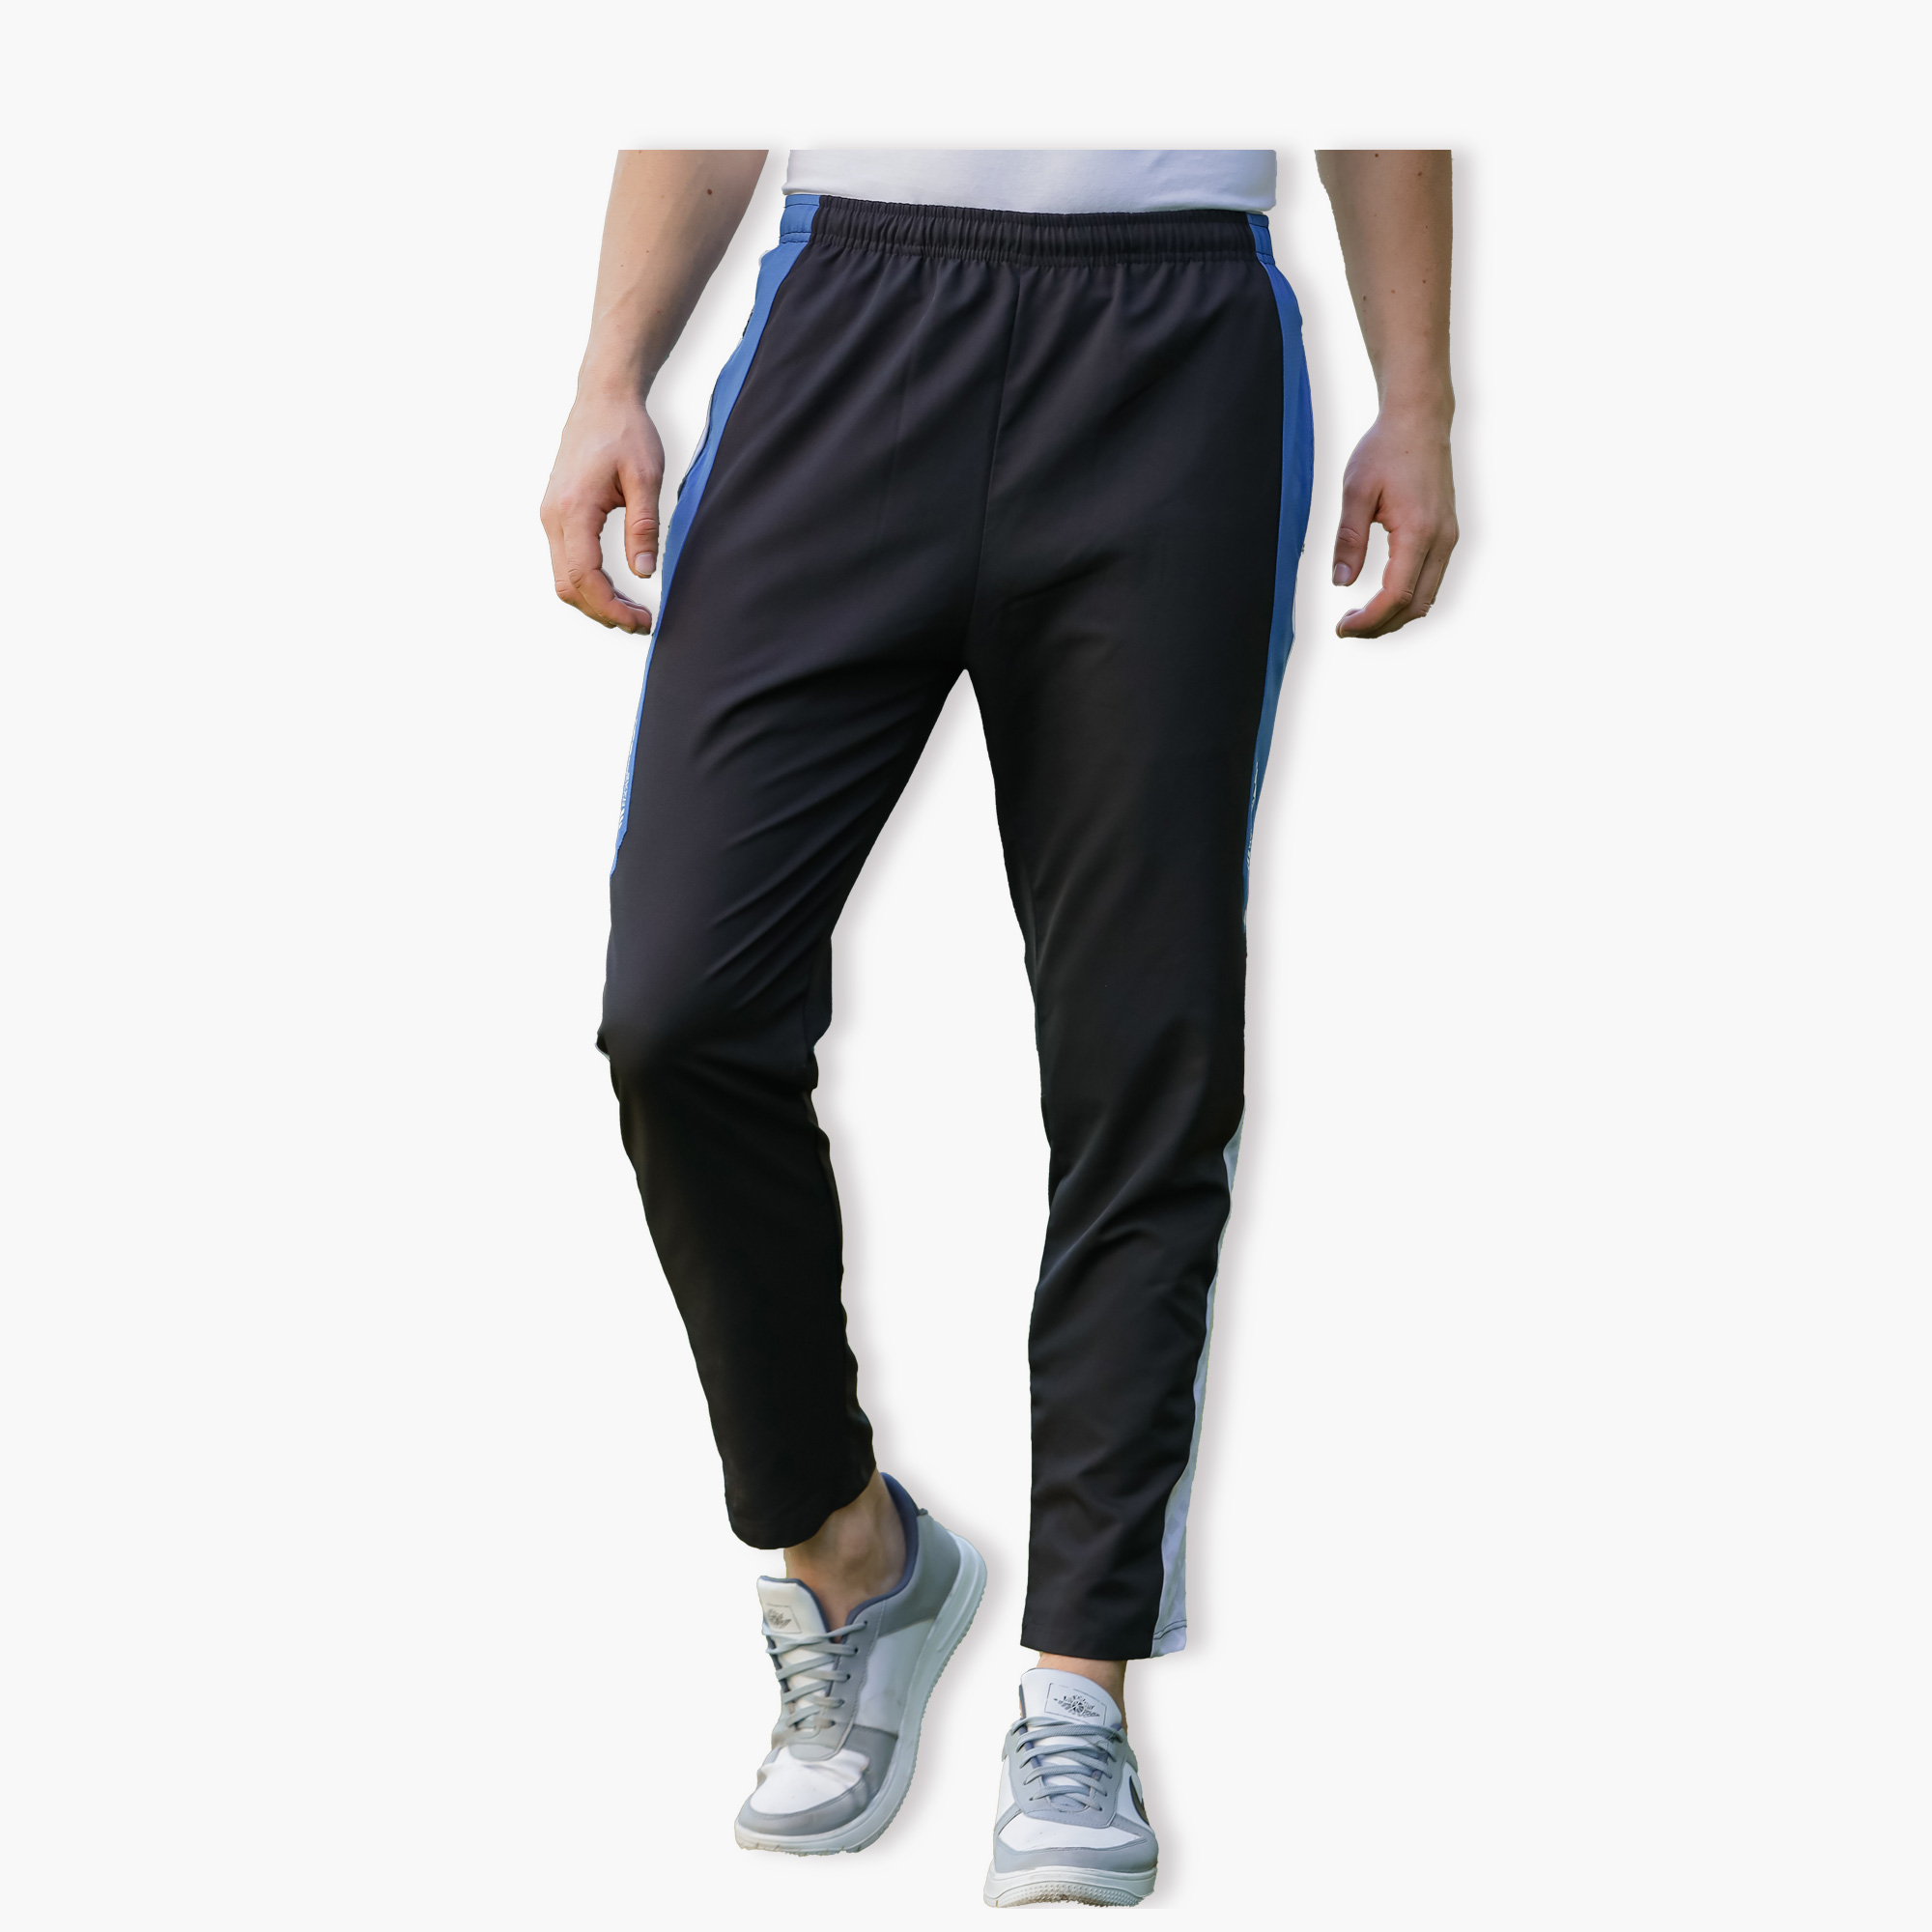 SG Century Cricket Pant | Buy Online India | Cricket Clothing, Kit & Whites  | See Price, Photos & Features | Specialist Cricket Shop India